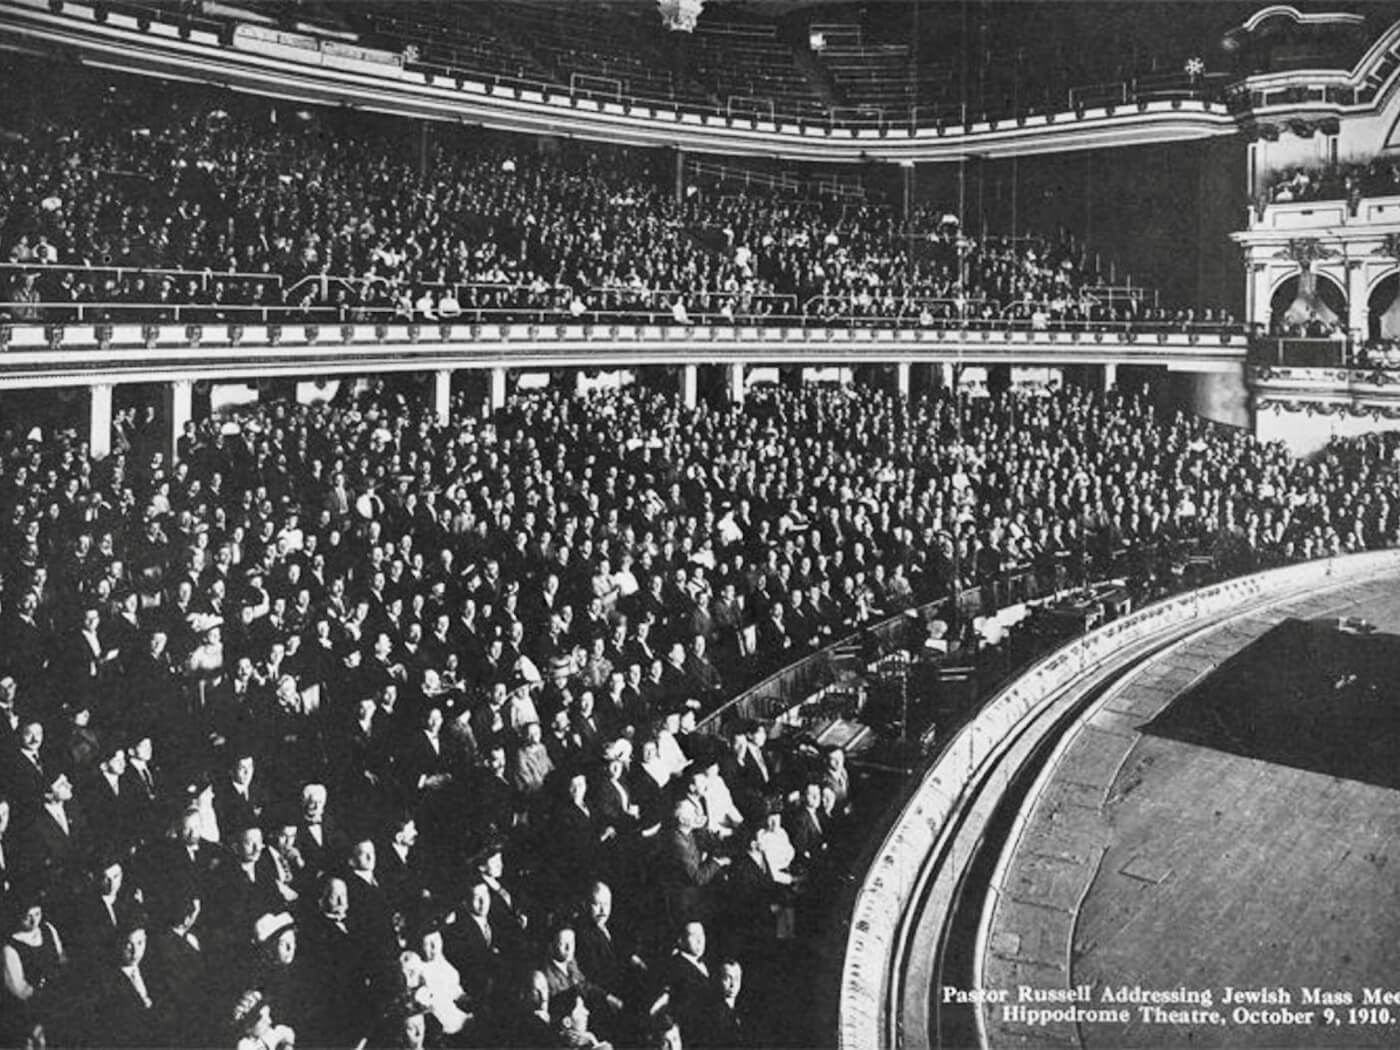 Russell addresses an audience of American Jews in New York in 1910. Photo | Public Domain